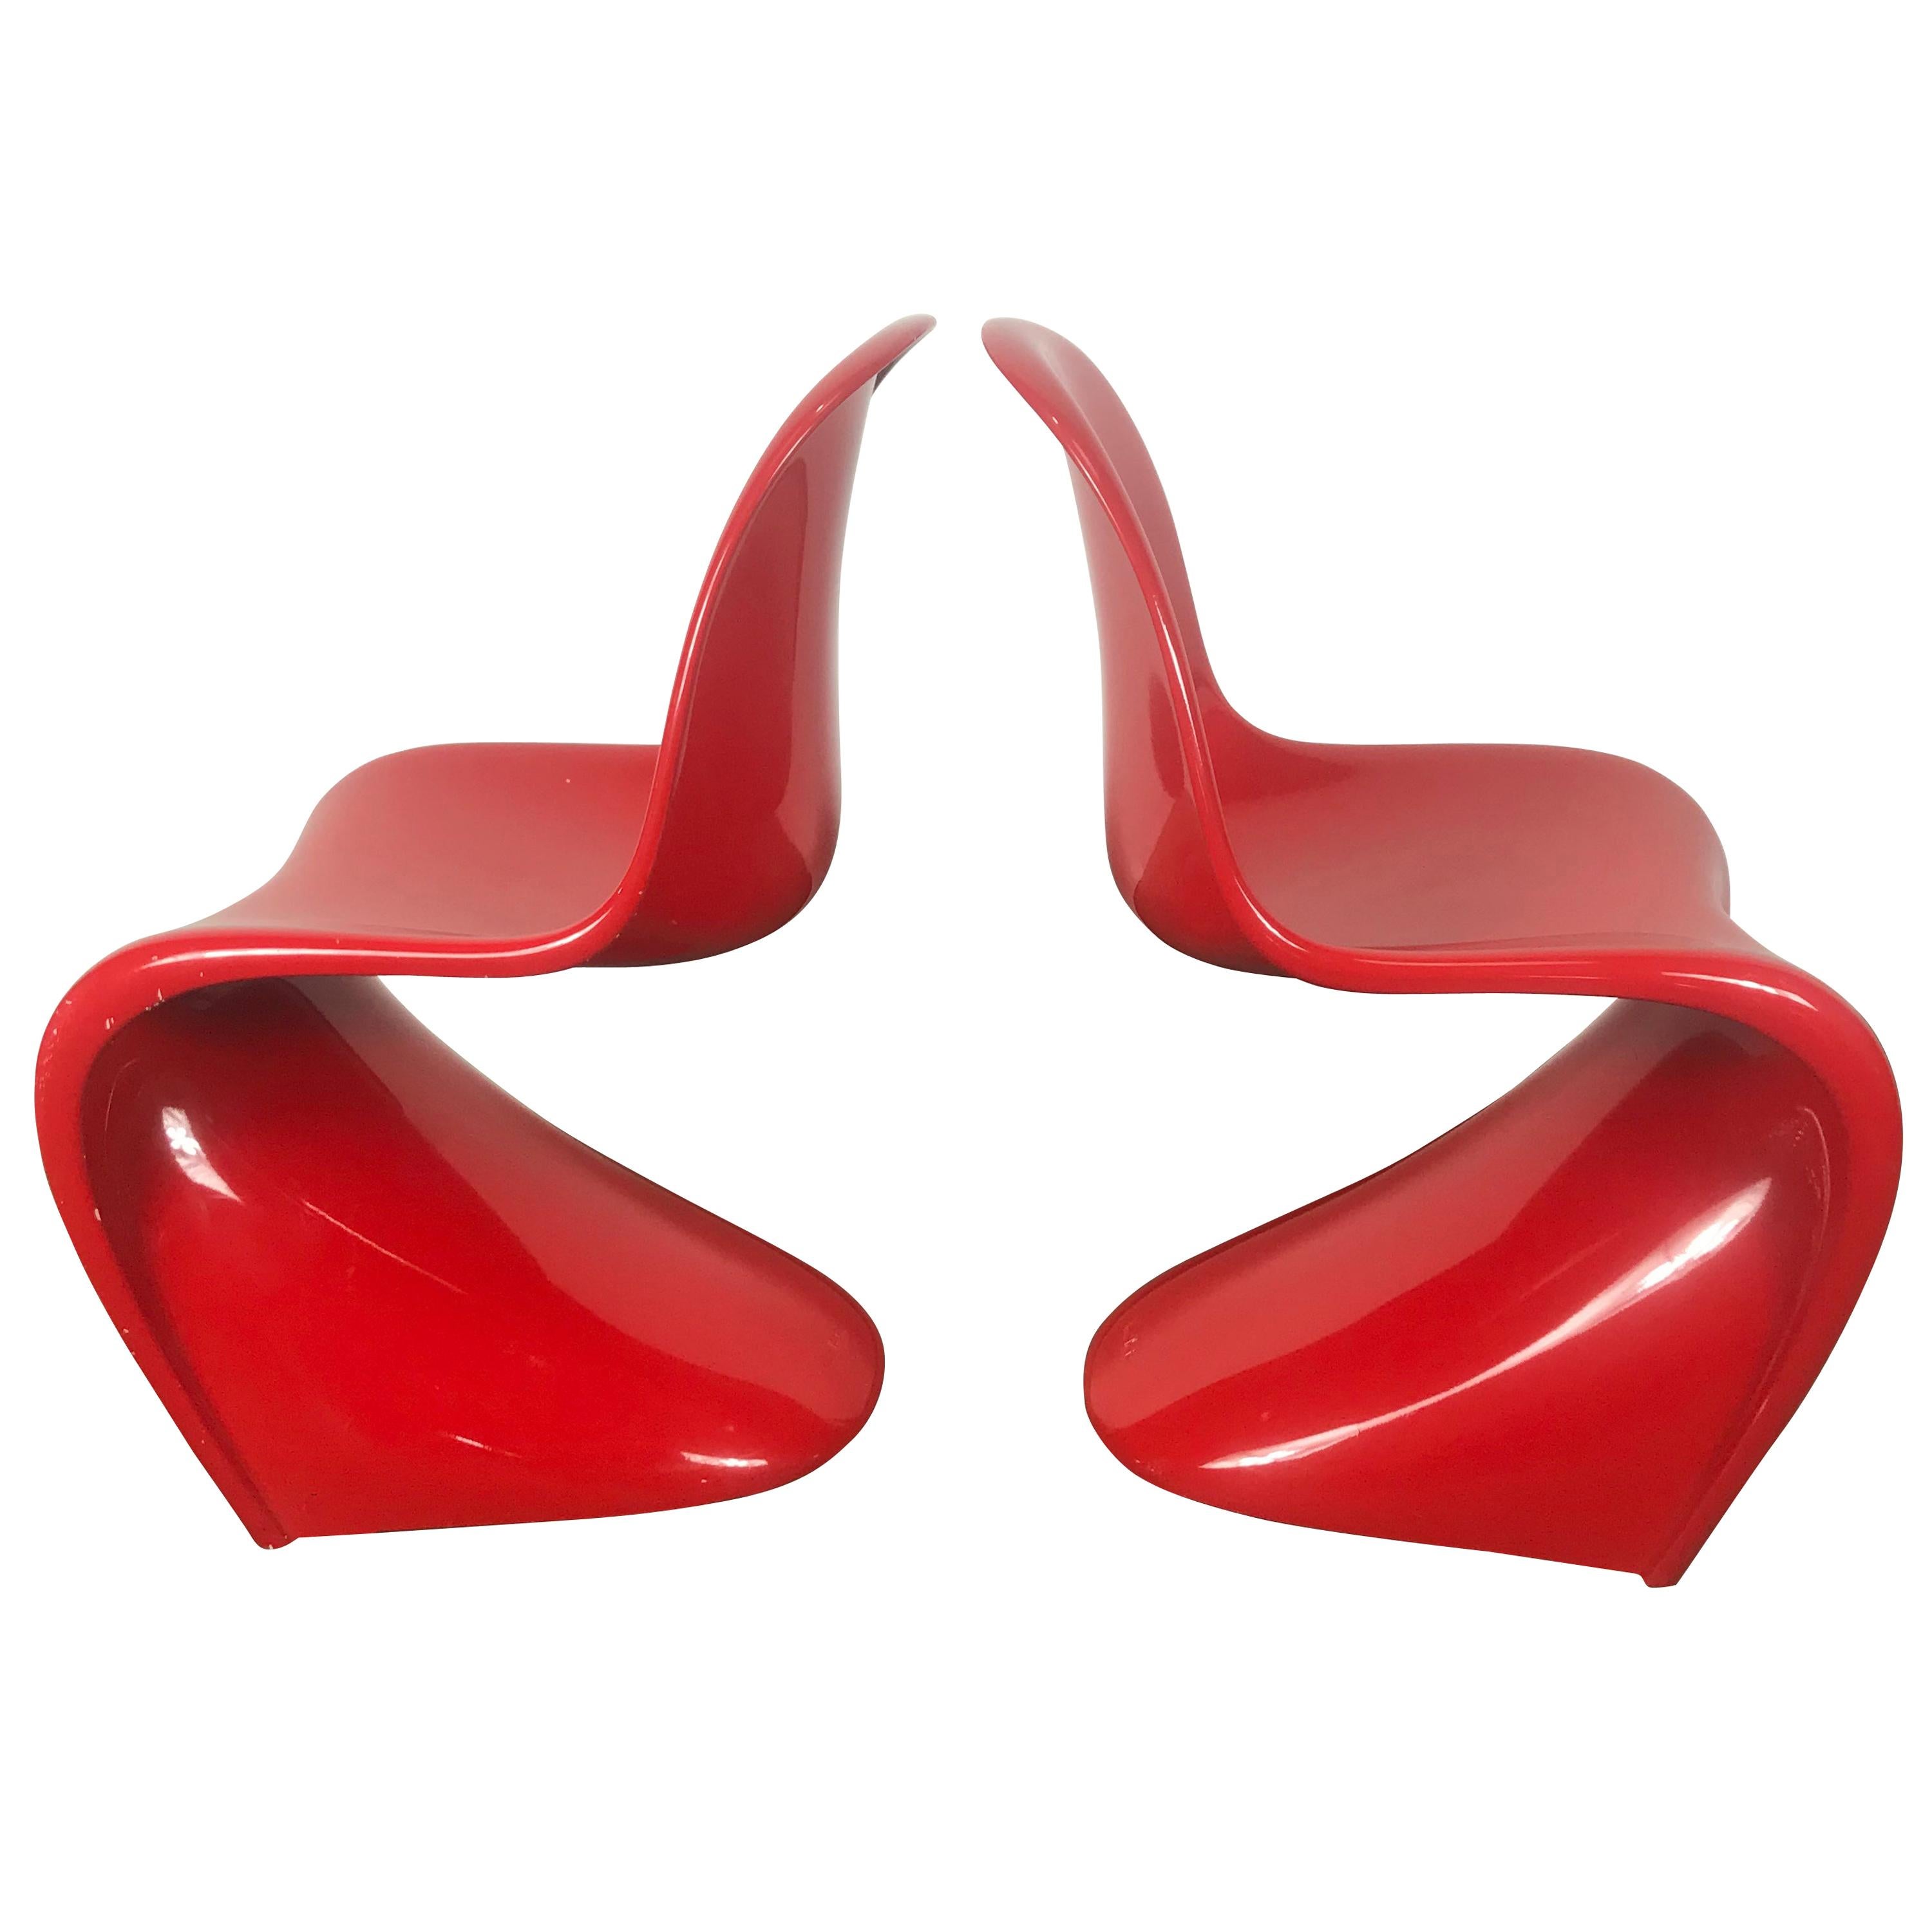 Classic Pair of Red Molded Plastic 'S' Chairs by Verner Panton for Vitra